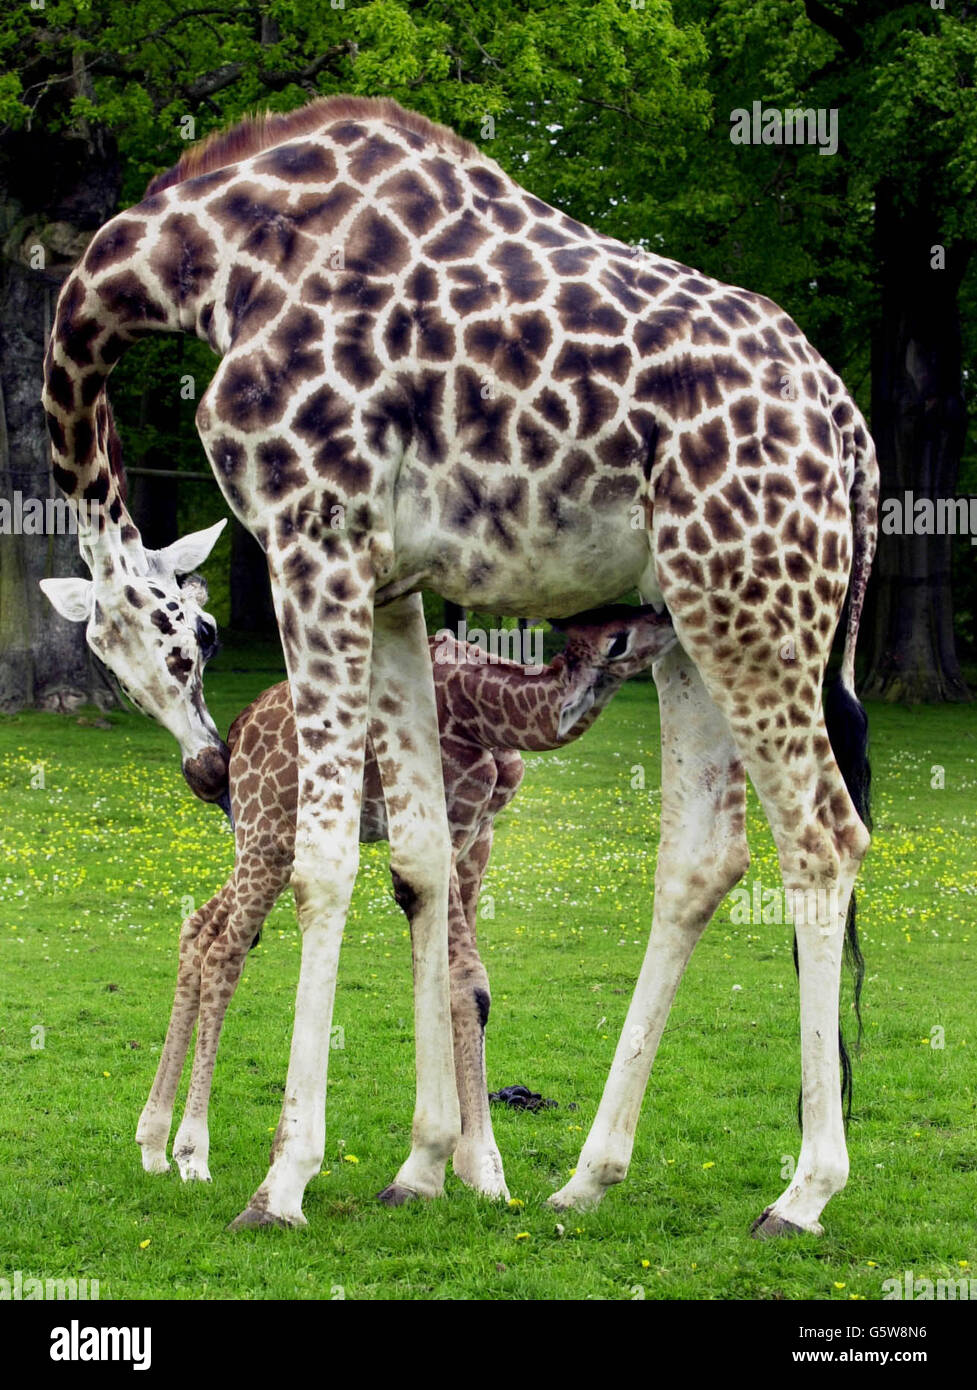 Shakula, a Rothschild giraffe, receives some loving attention at Longleat Safari Park from her mother, Jolly. The six foot two inches baby born April 26, 2002, is the eighth calf to be born to Jolly at Lord Bath's Wiltshire estate and park. Stock Photo